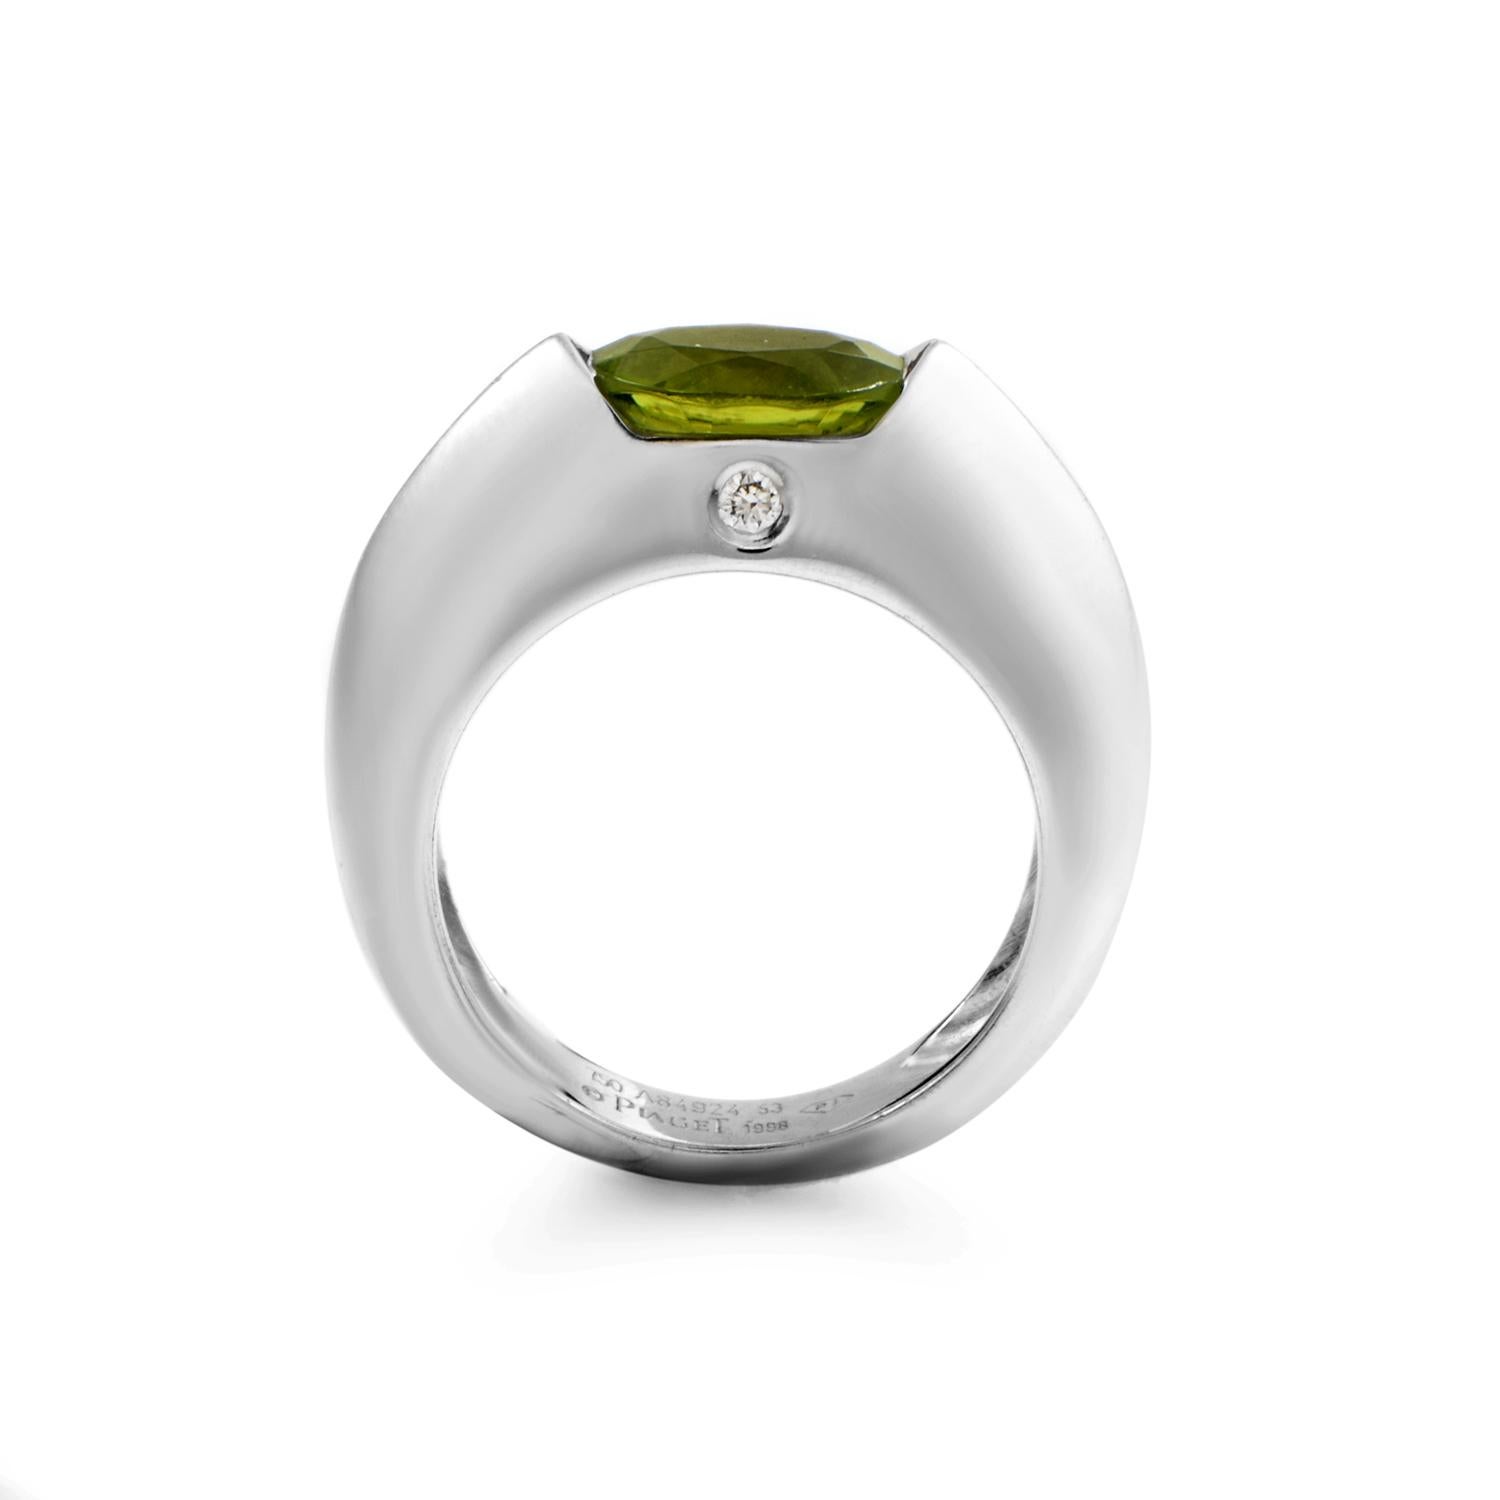 This fashionable Piaget ring features a classy design that will effectively accompany any style and look; it's made of finest 18K white gold and boasts a striking peridot as main stone, while on the side is subtly accented with a diamond.
